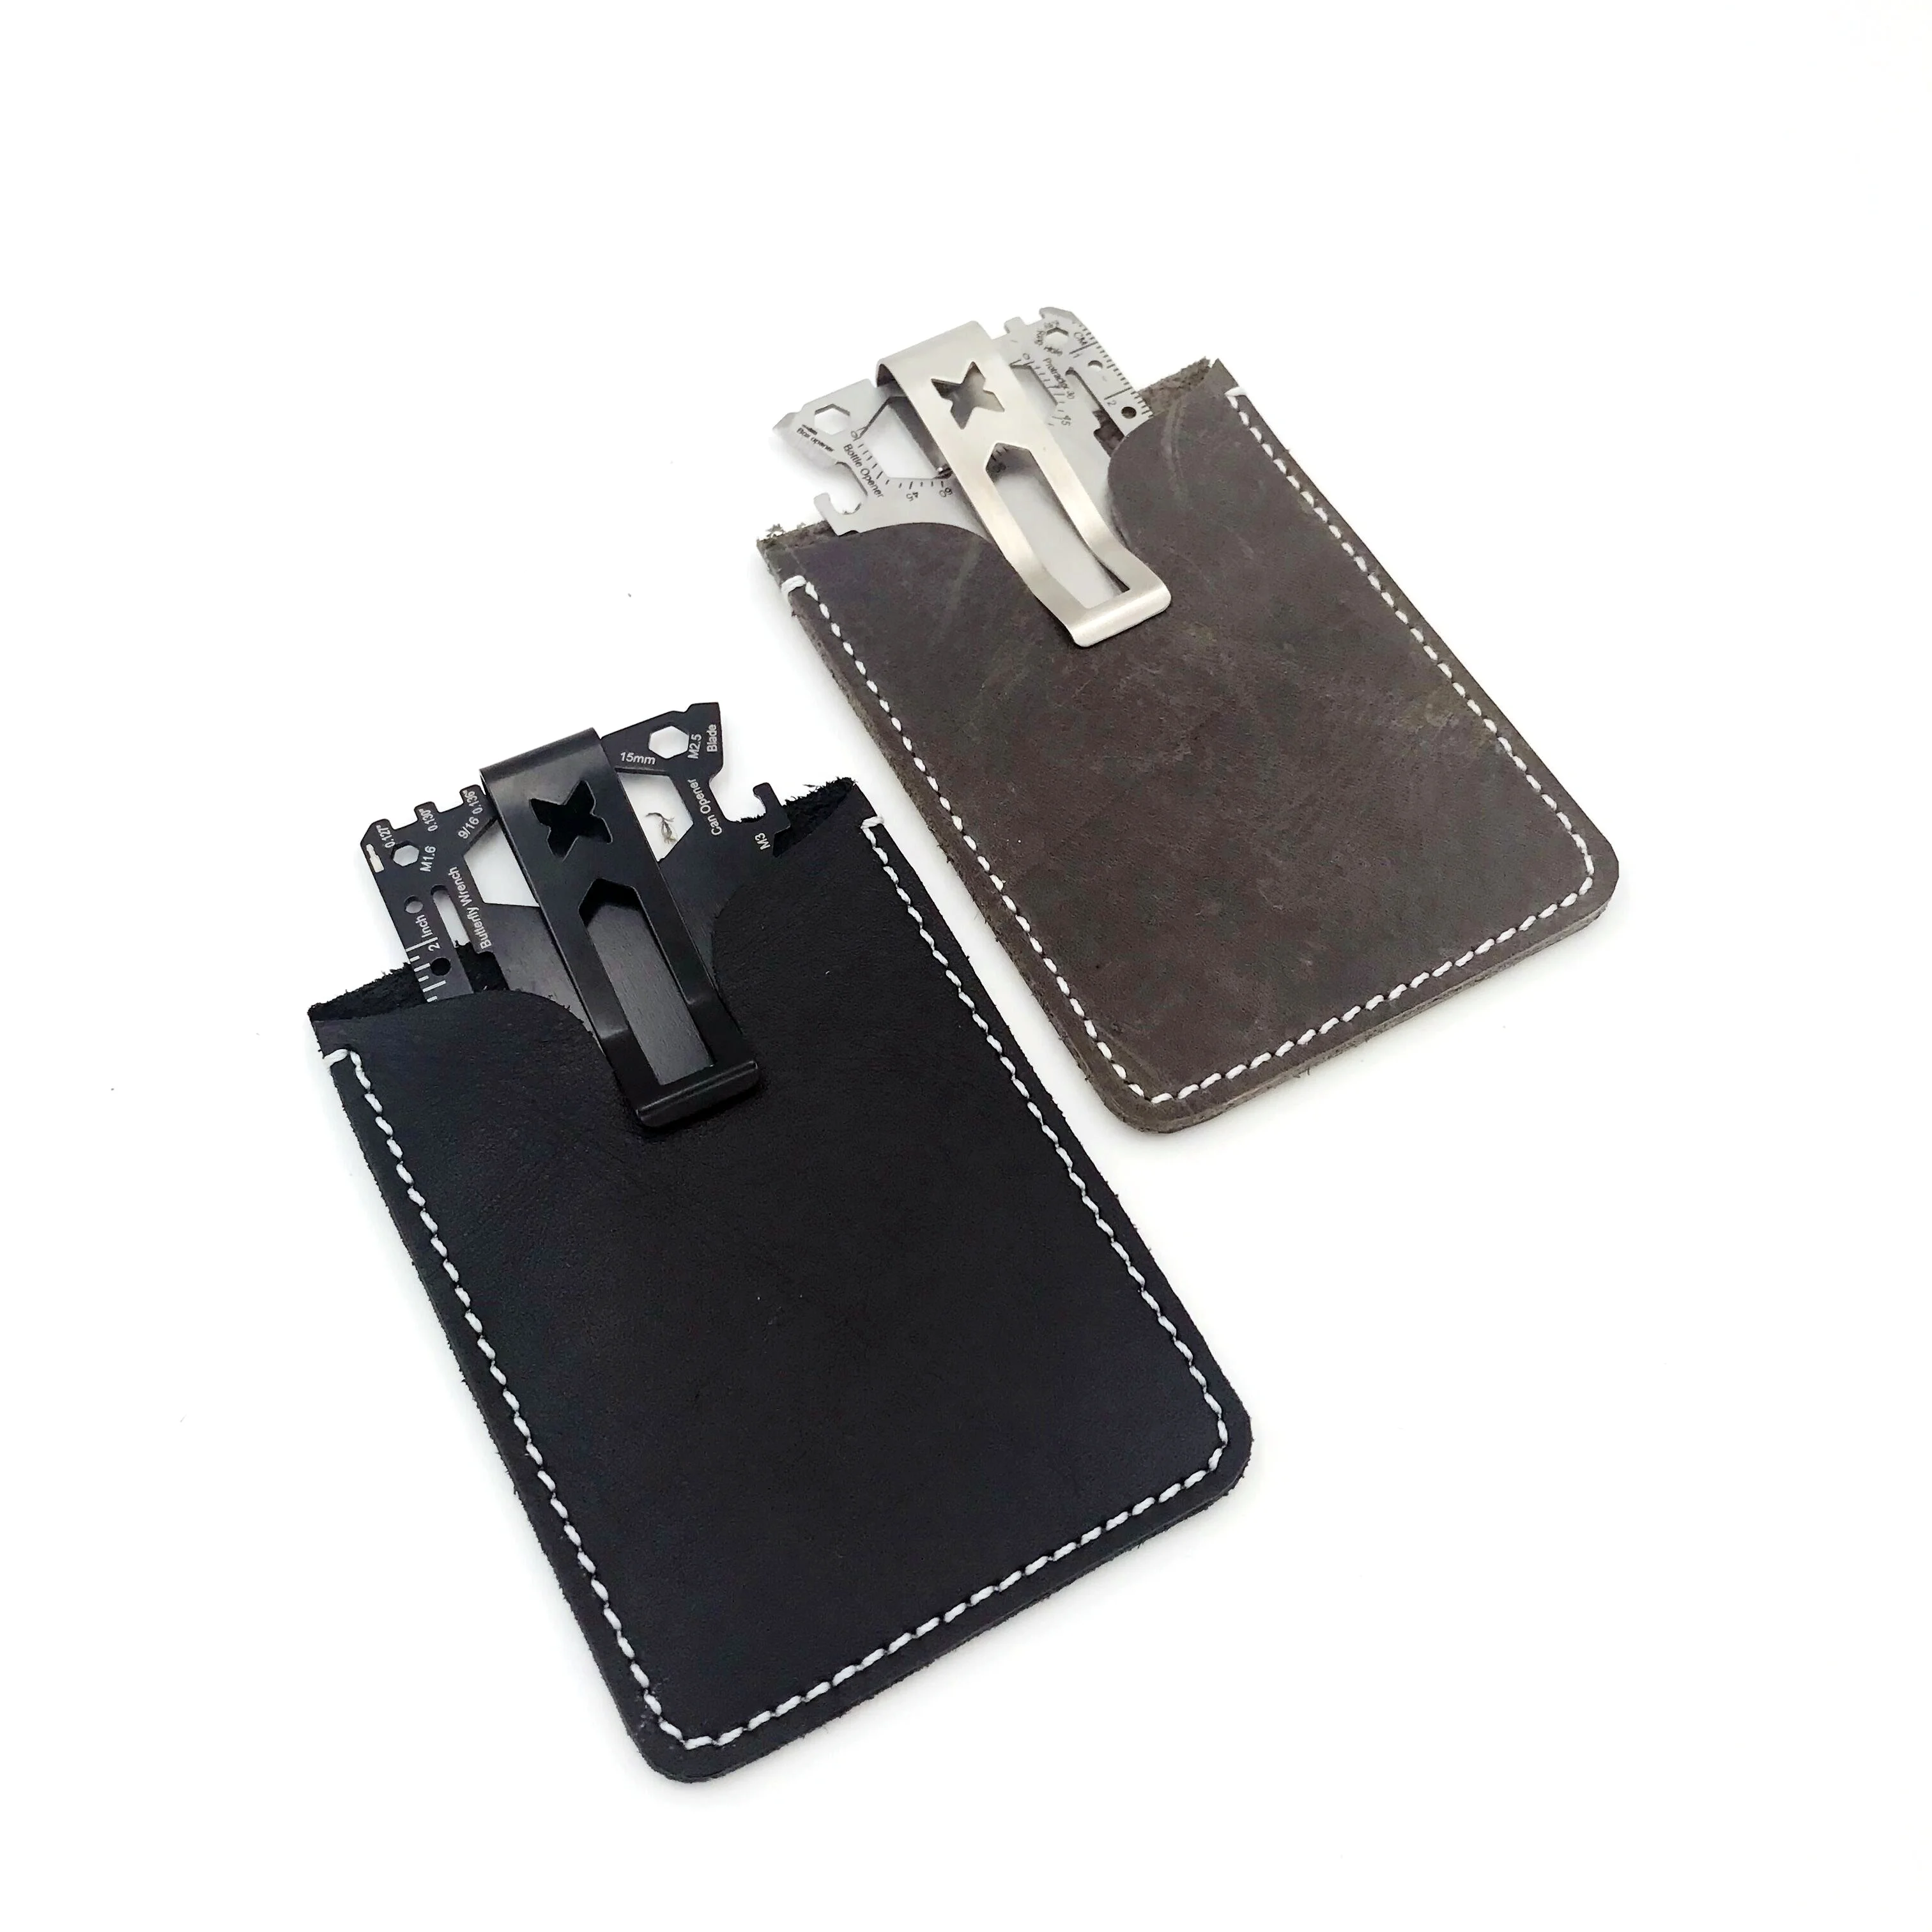 

High Quality Pouch Stainless Steel Multi Functional Opener Survival Wallet Credit Card Multitool, Customized